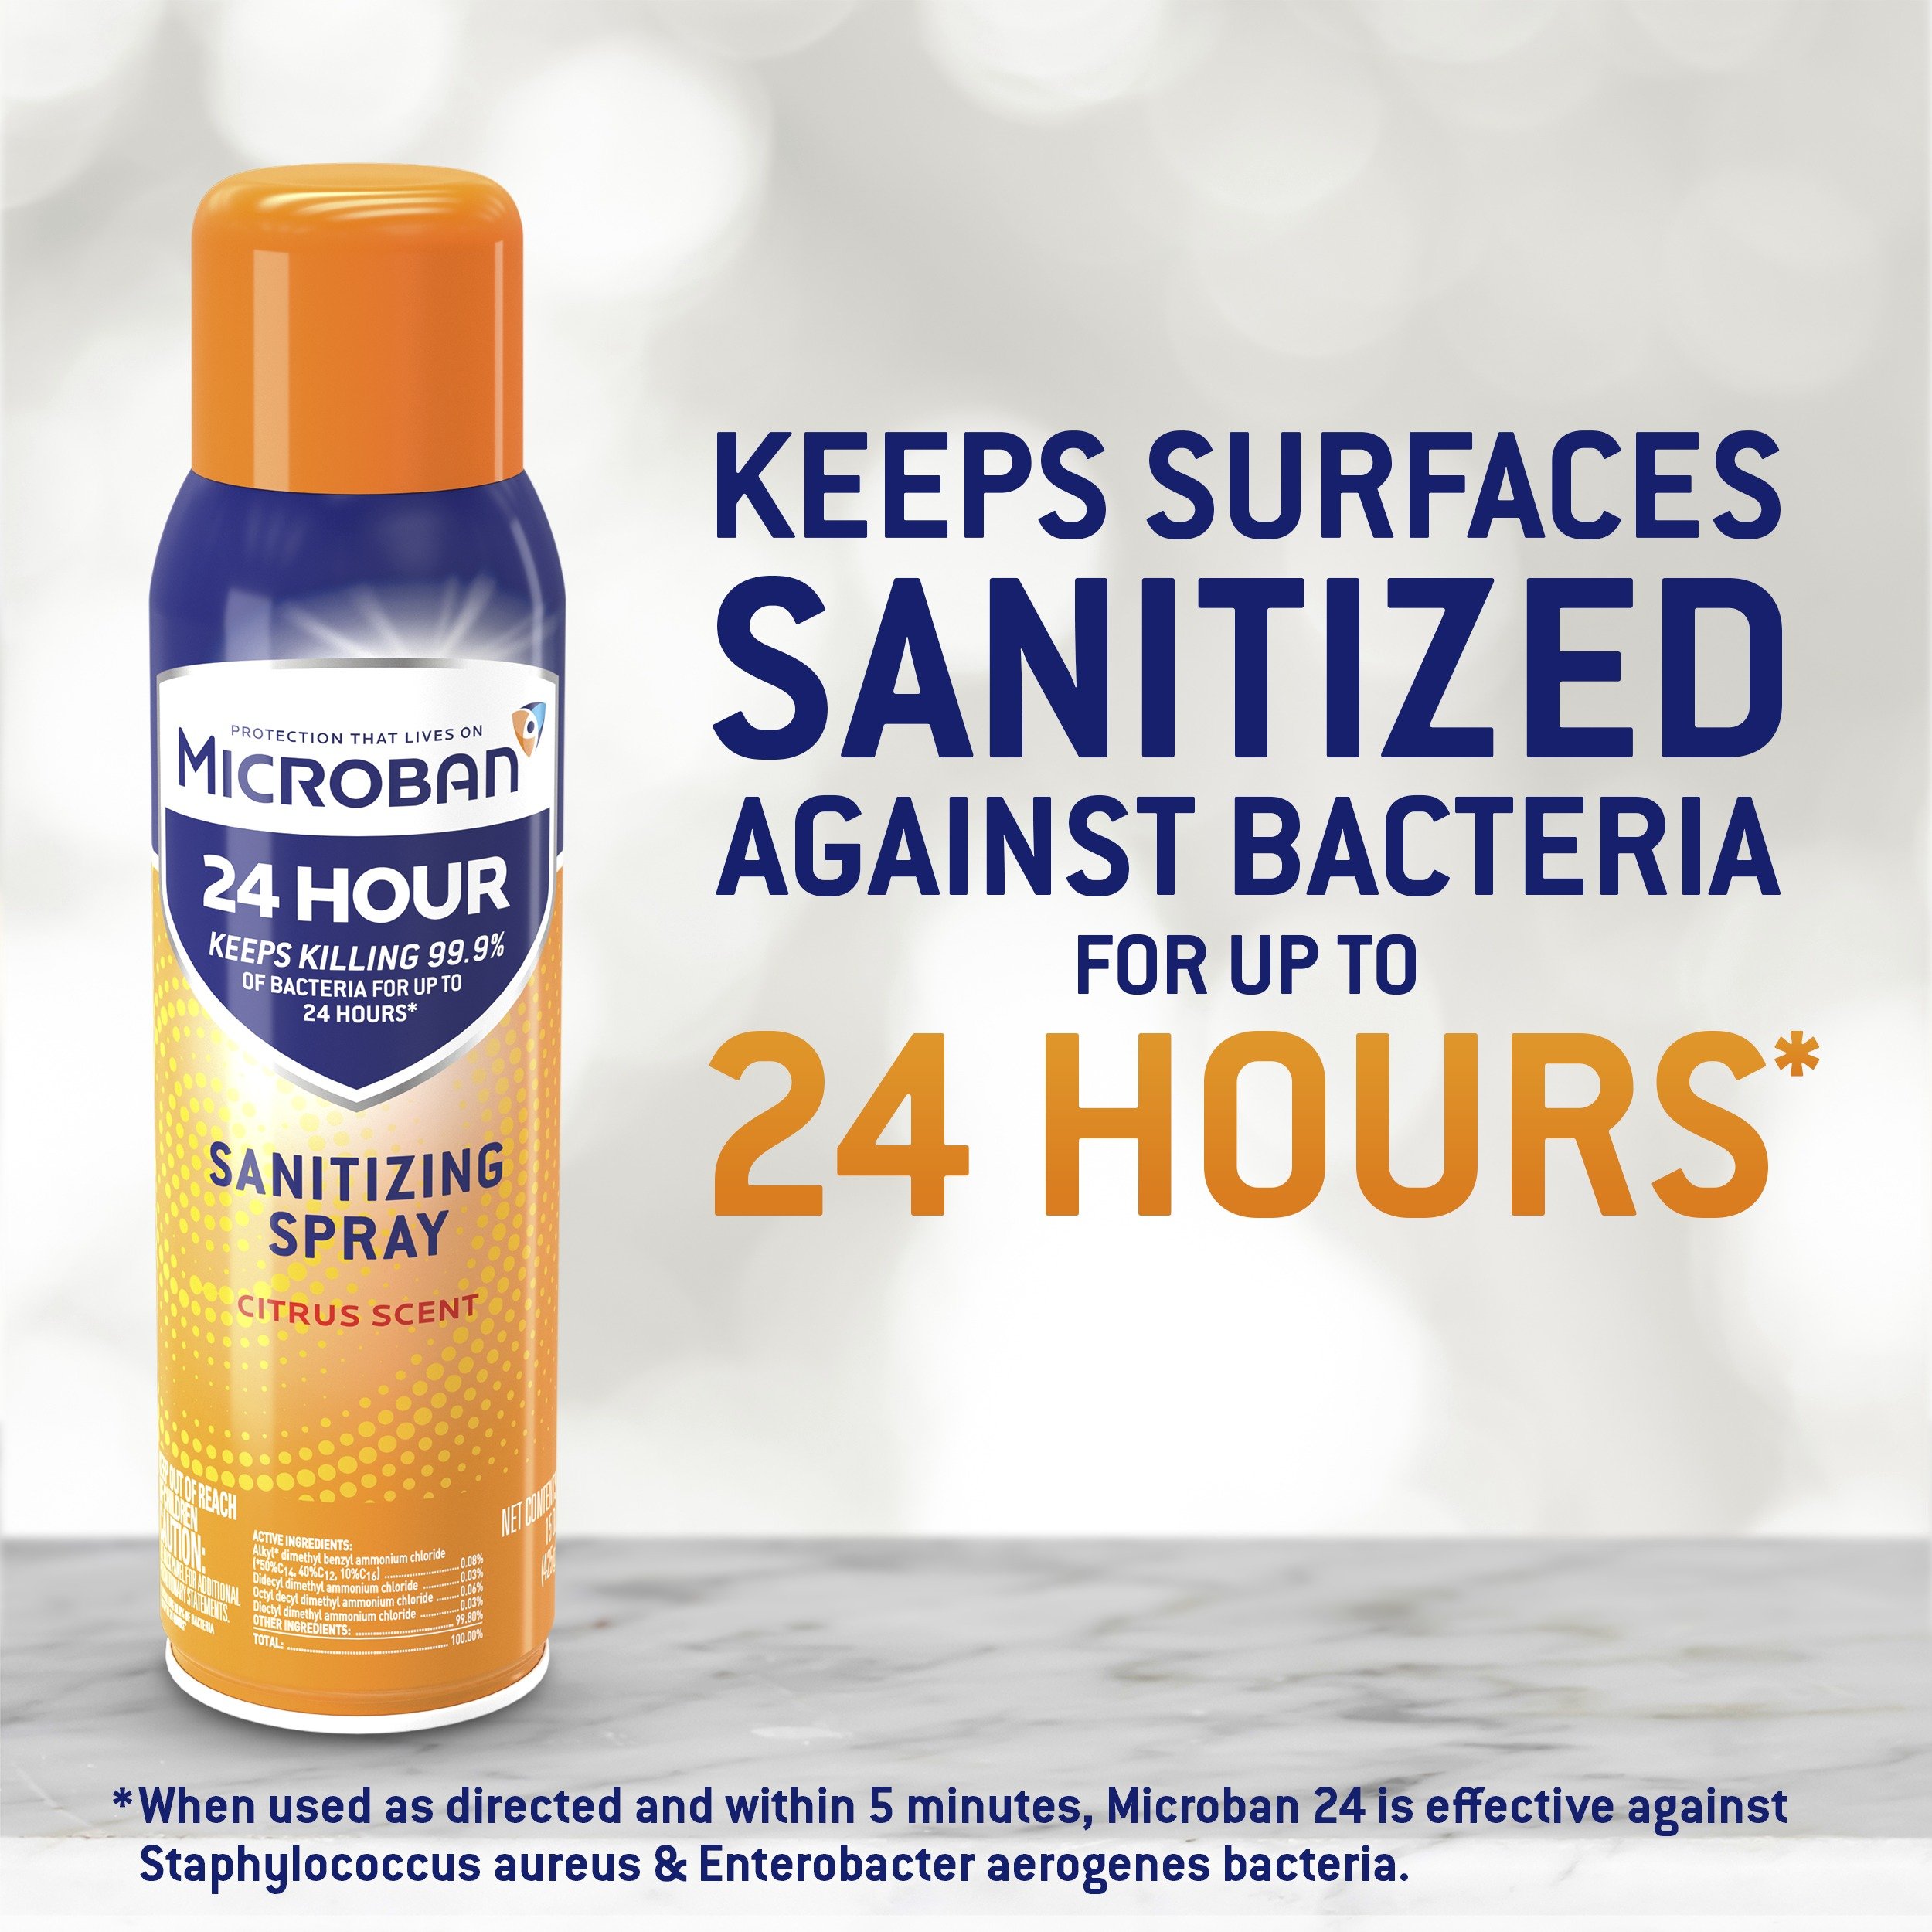 Product photo of Microban sanitizing spray that says, "keeps surfaces sanitized against bacteria for up to 24 hours"